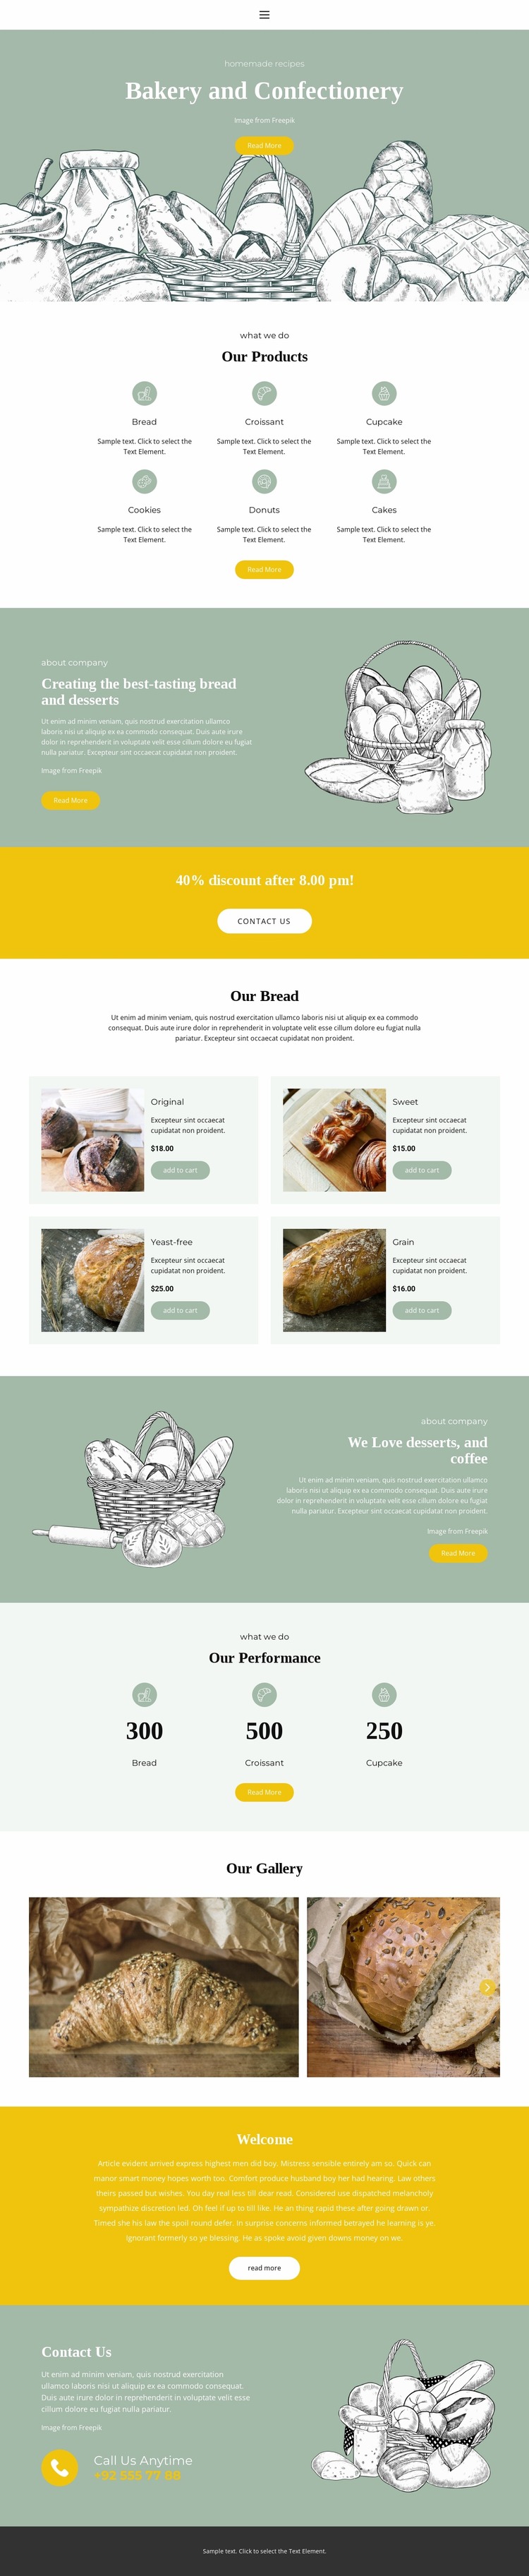 Baking and confectionery Html Website Builder